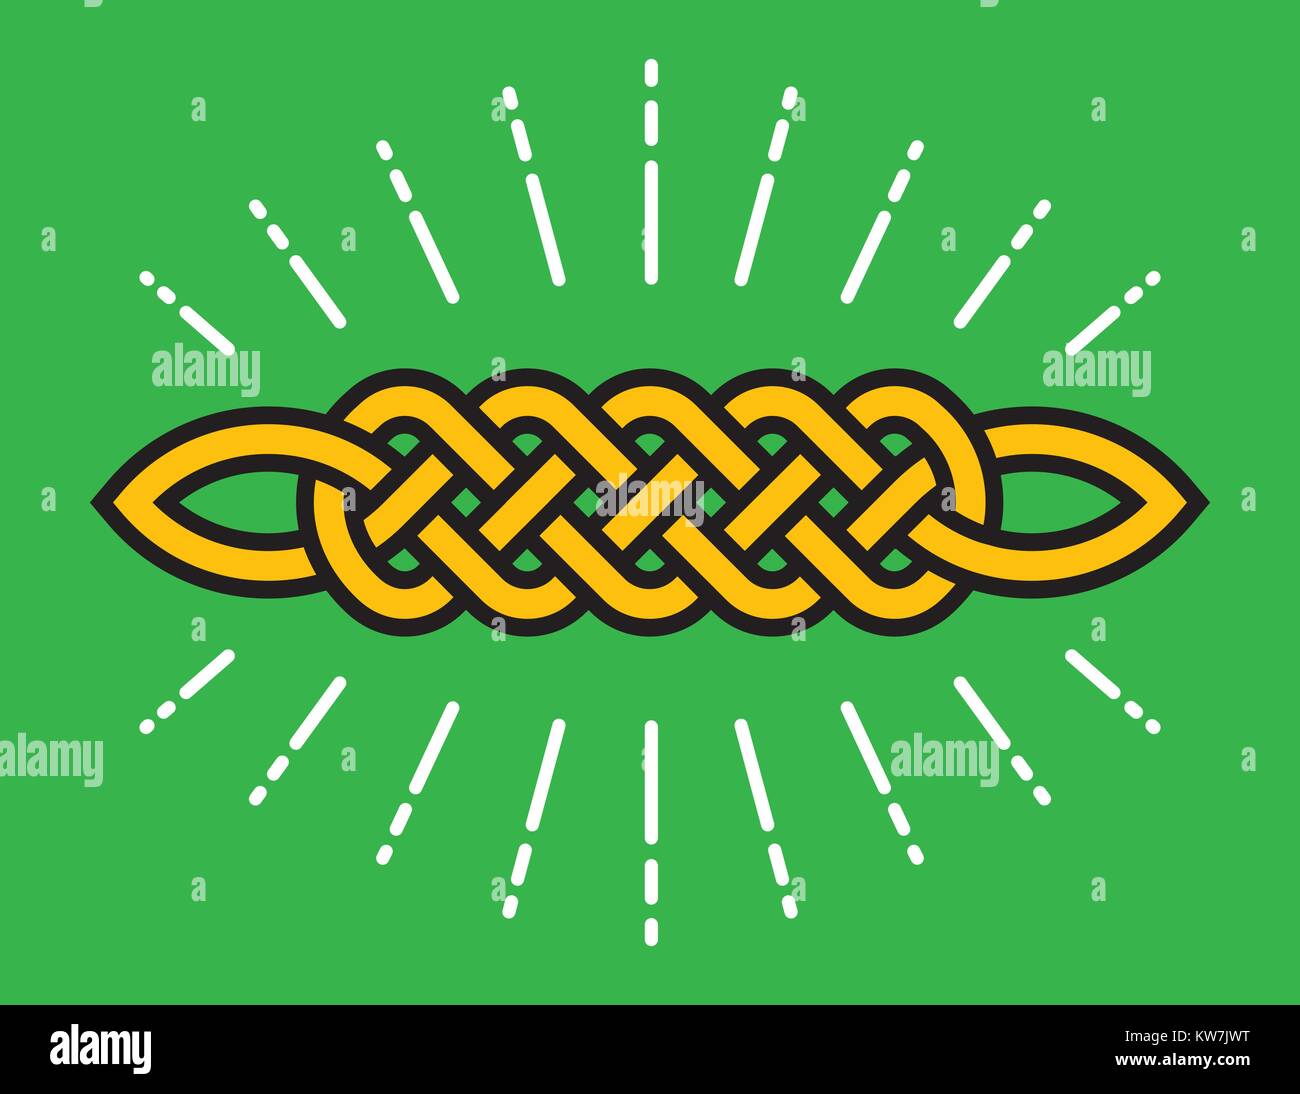 Celtic Infinity Knot Vector Design. Classic knot design symbolizing eternity and symmetry with radiating lines around it. Stock Vector